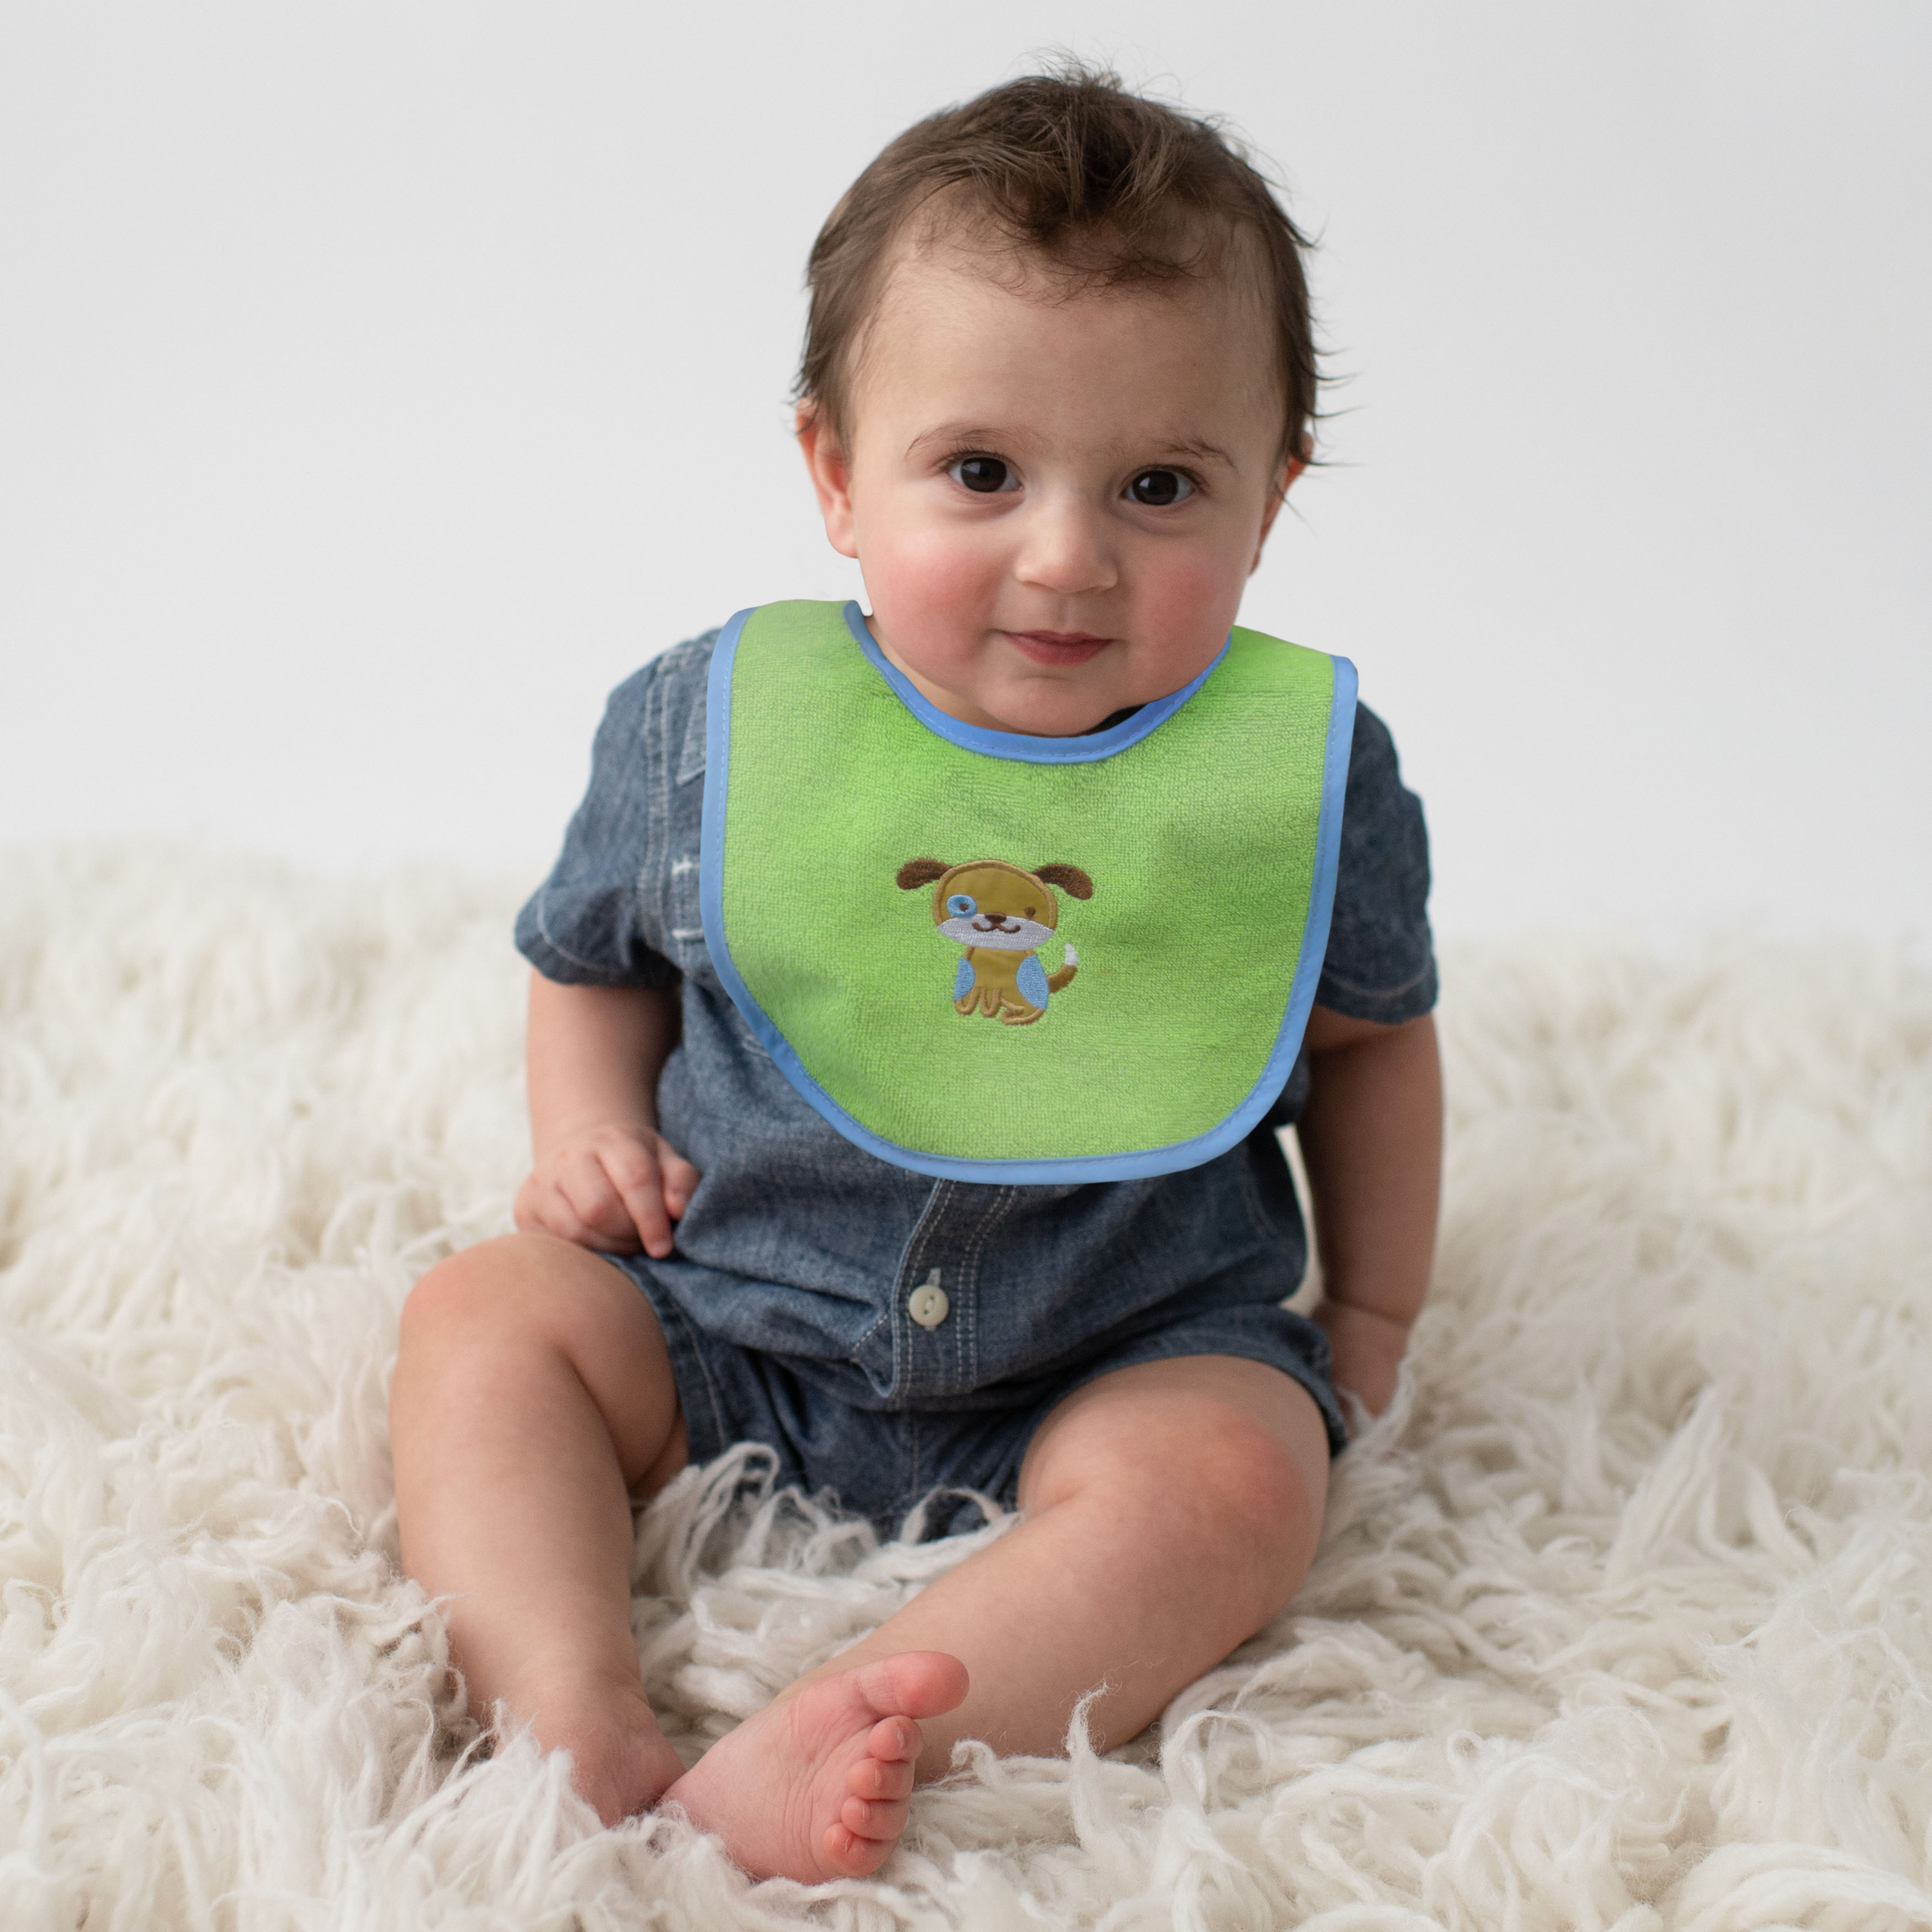 Neat Solutions Cotton and Polyester Baby Bib, 10pk Boys - image 5 of 12